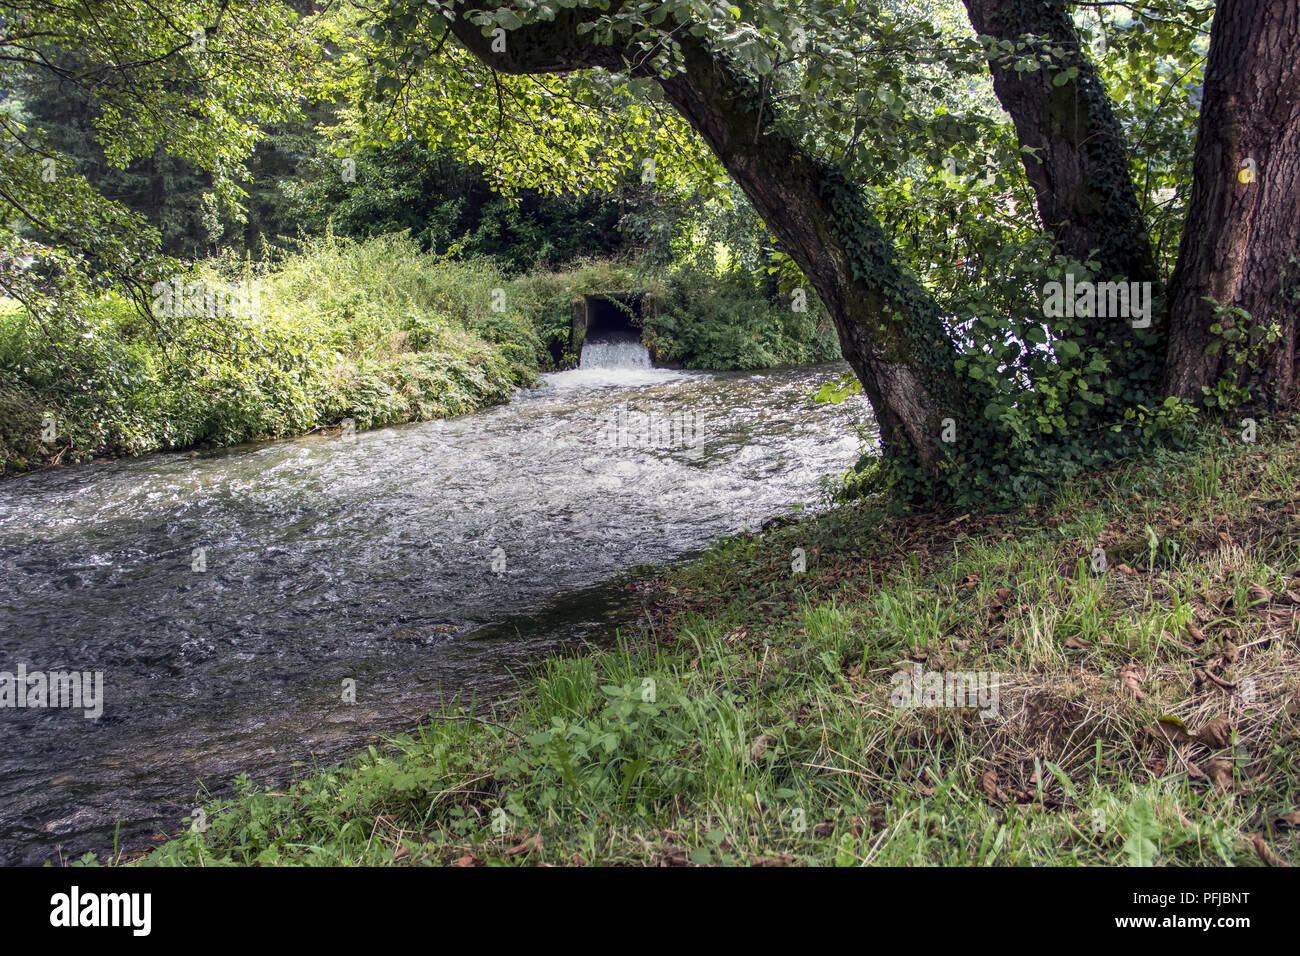 TARA National Park, Western Serbia - Waterfalls and rapids on a mountain river Vrelo Stock Photo